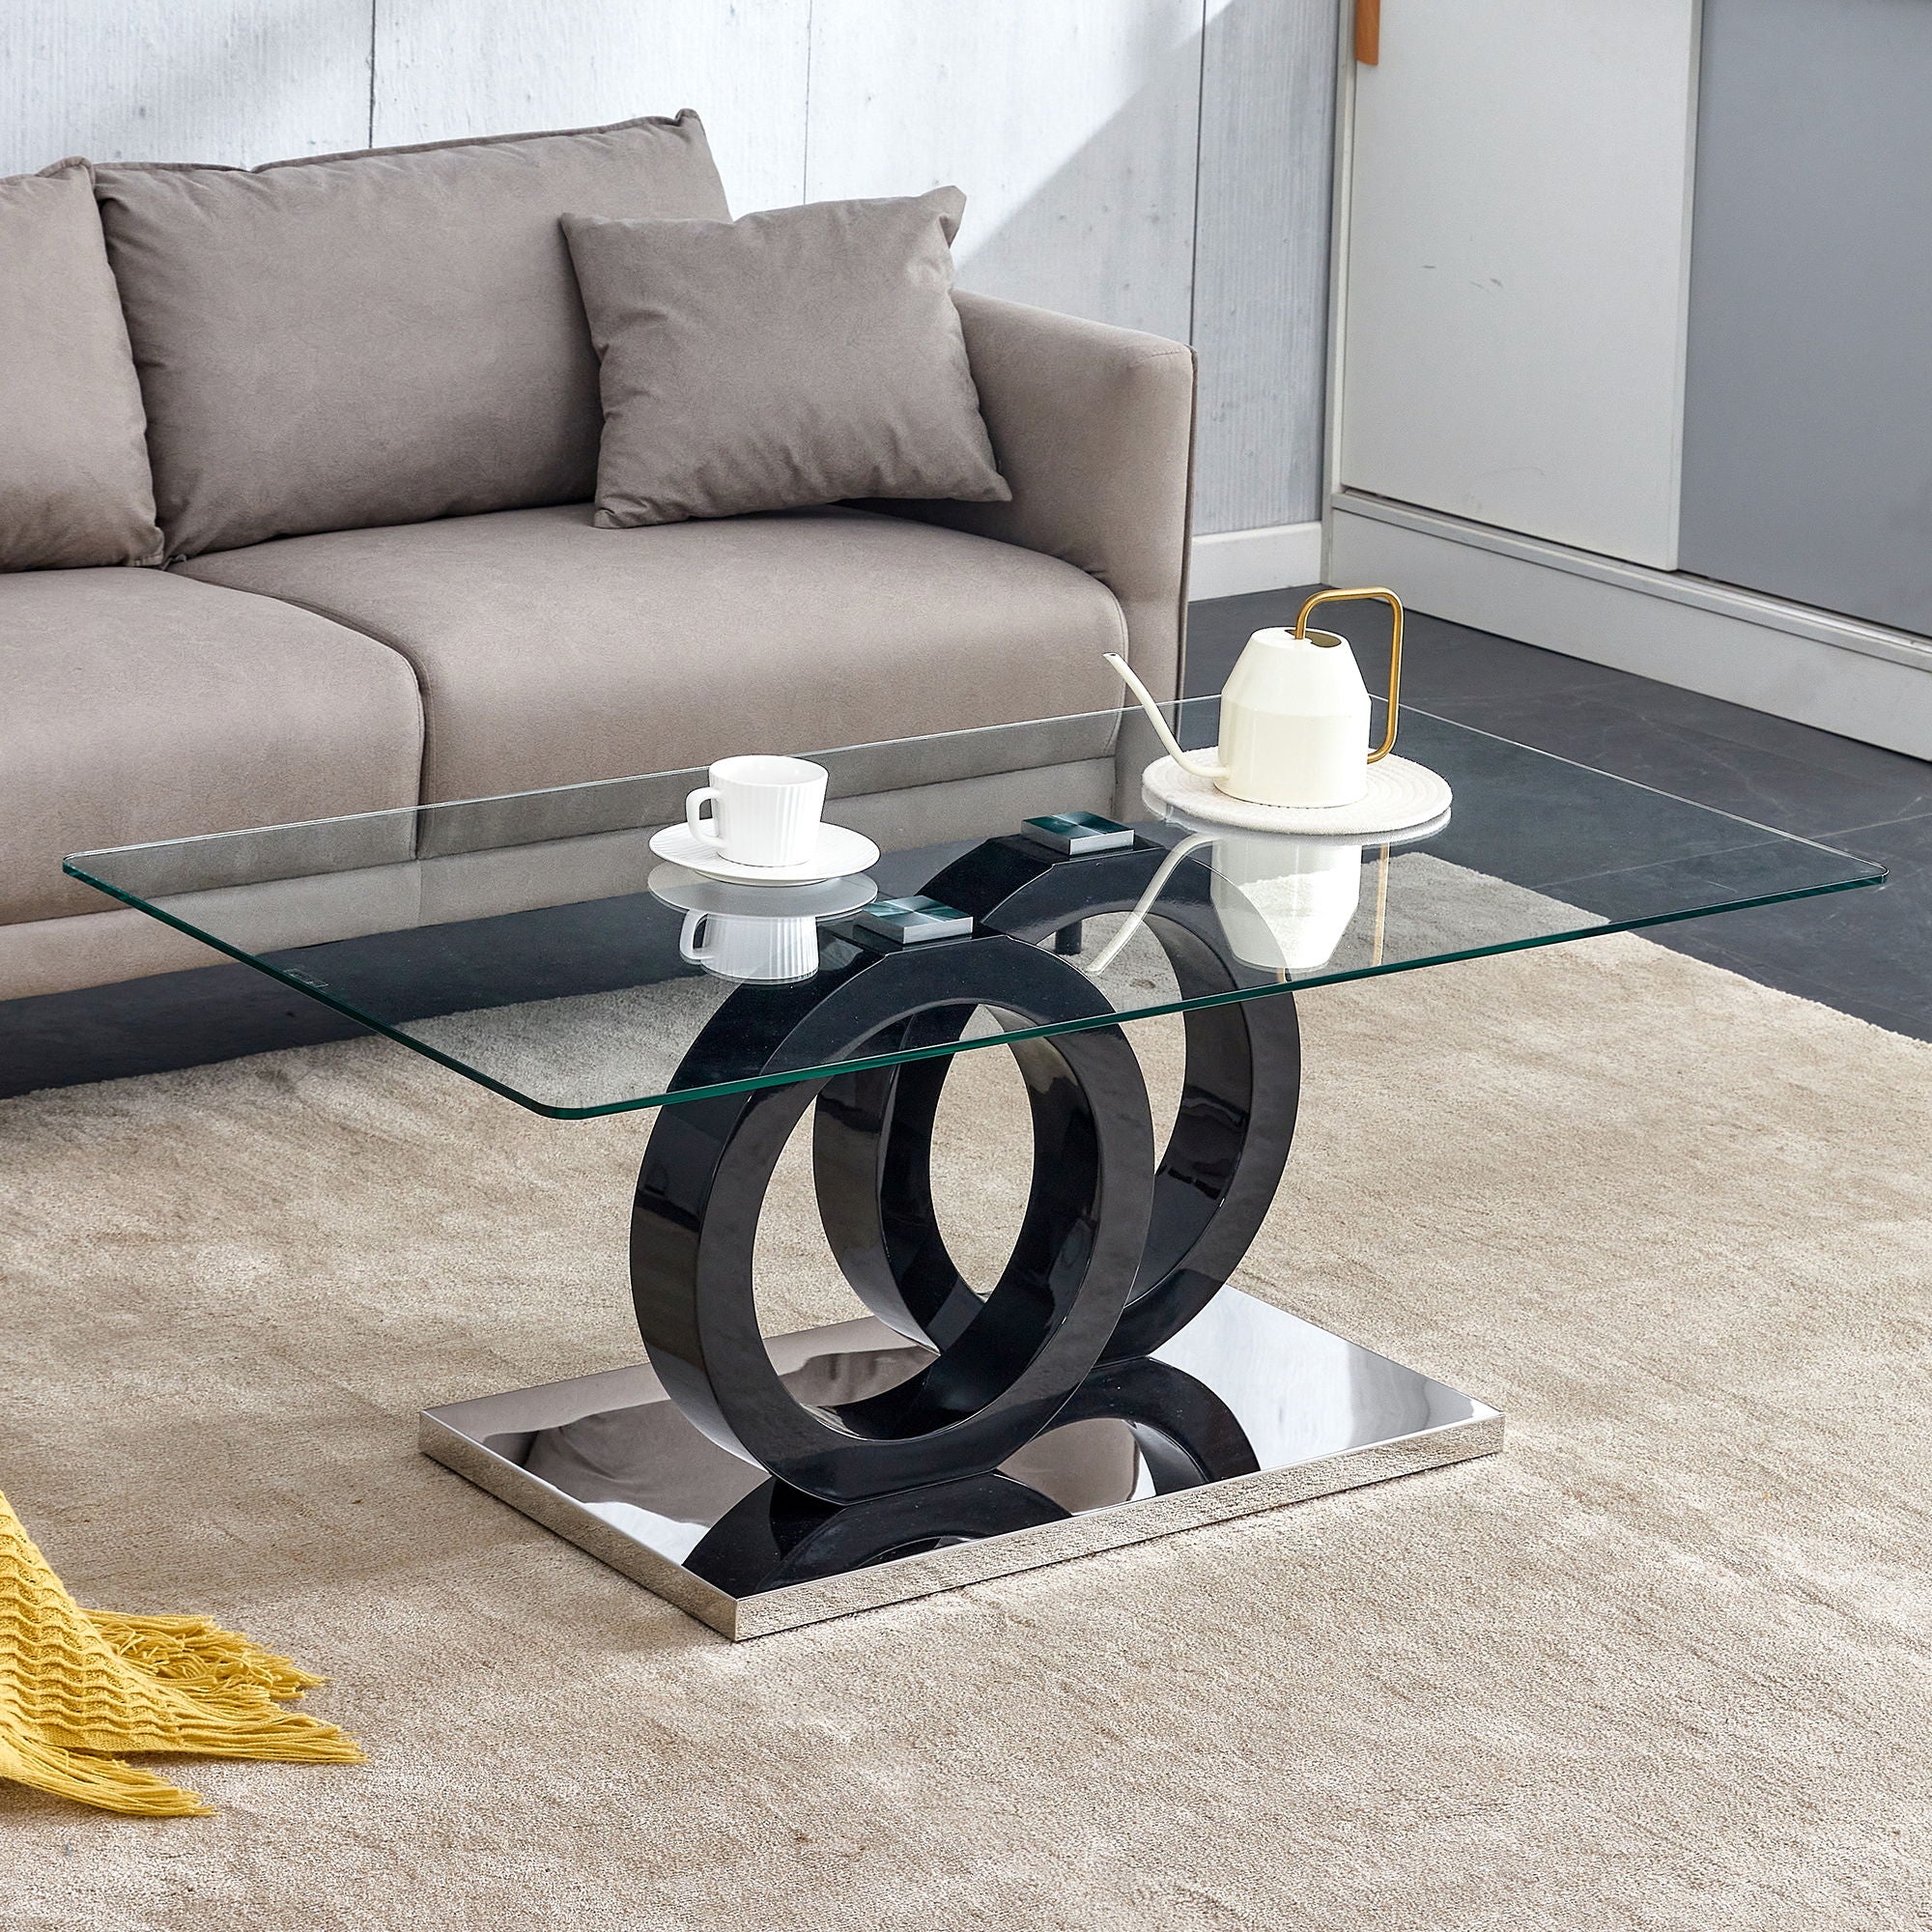 A Rectangular Modern And Fashionable Coffee Table With Tempered Glass Tabletop And Black Legs Suitable For Living Room